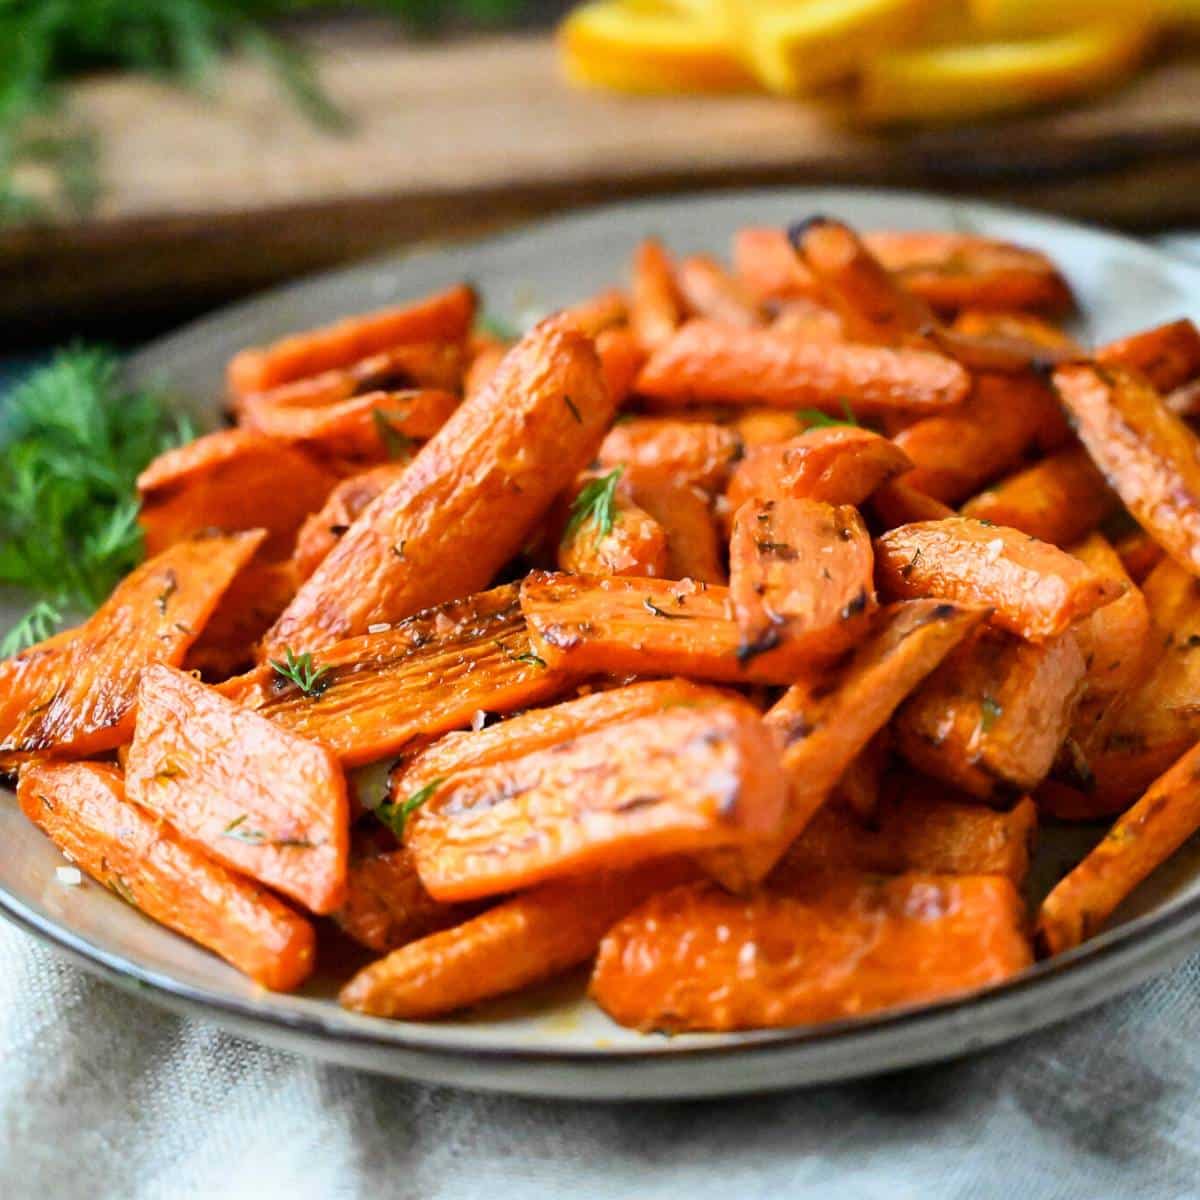 a plate of roasted carrots garnished with fresh dill